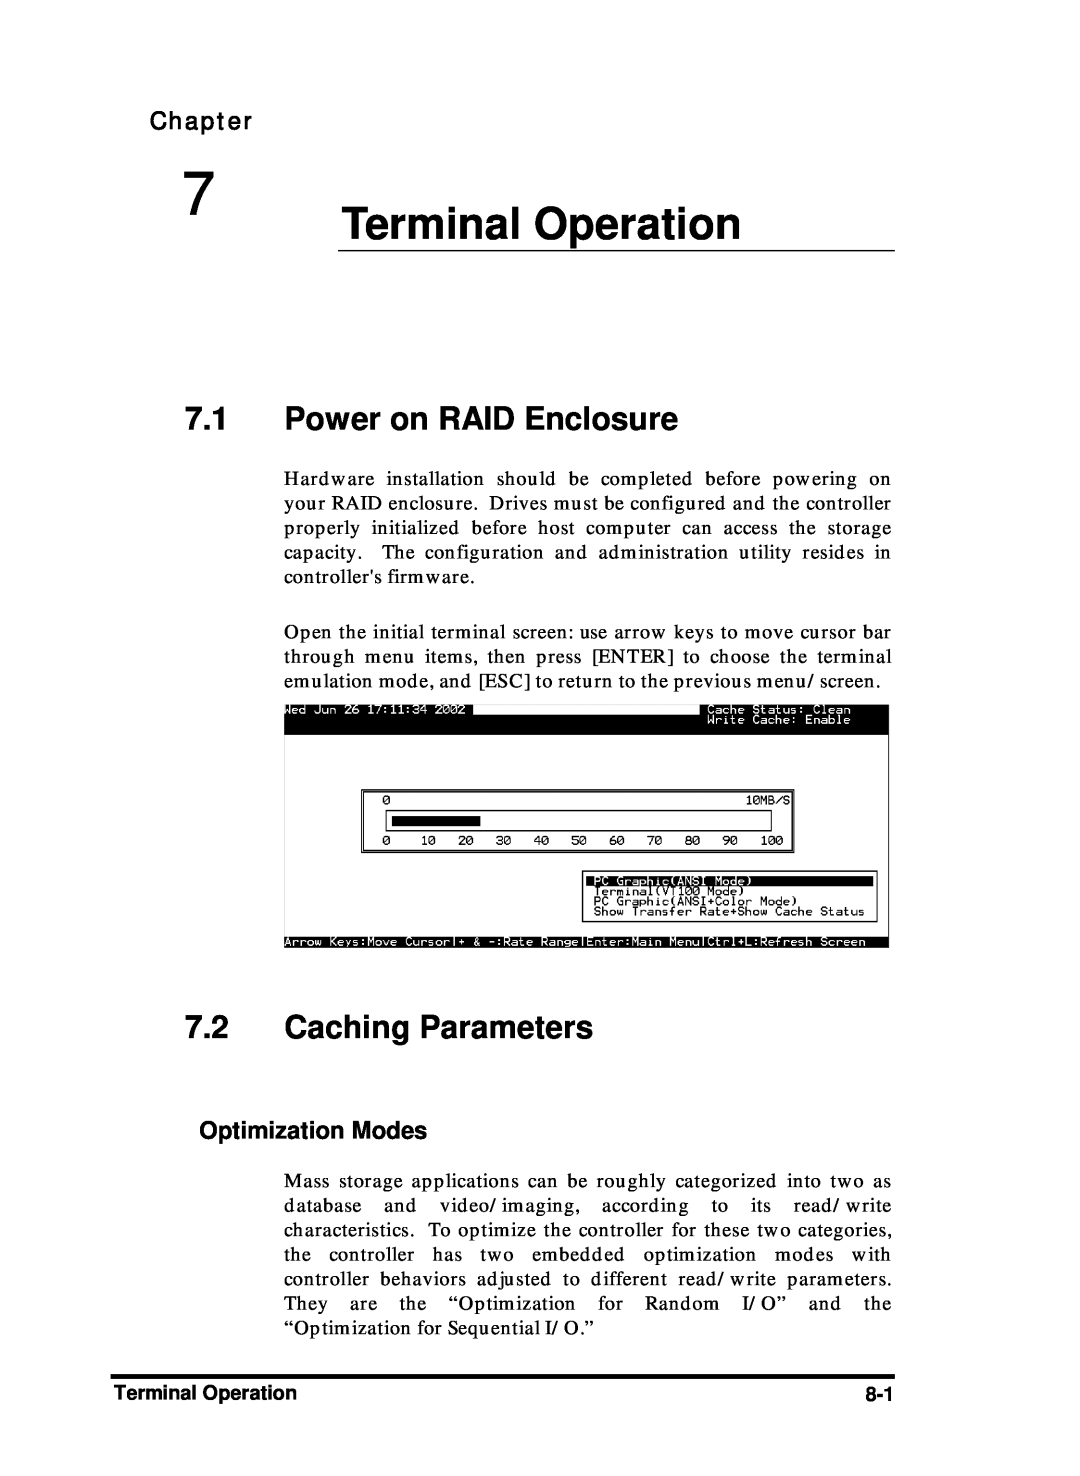 Compaq Infortrend manual Terminal Operation, Power on RAID Enclosure, Caching Parameters, Chapter, Optimization Modes 